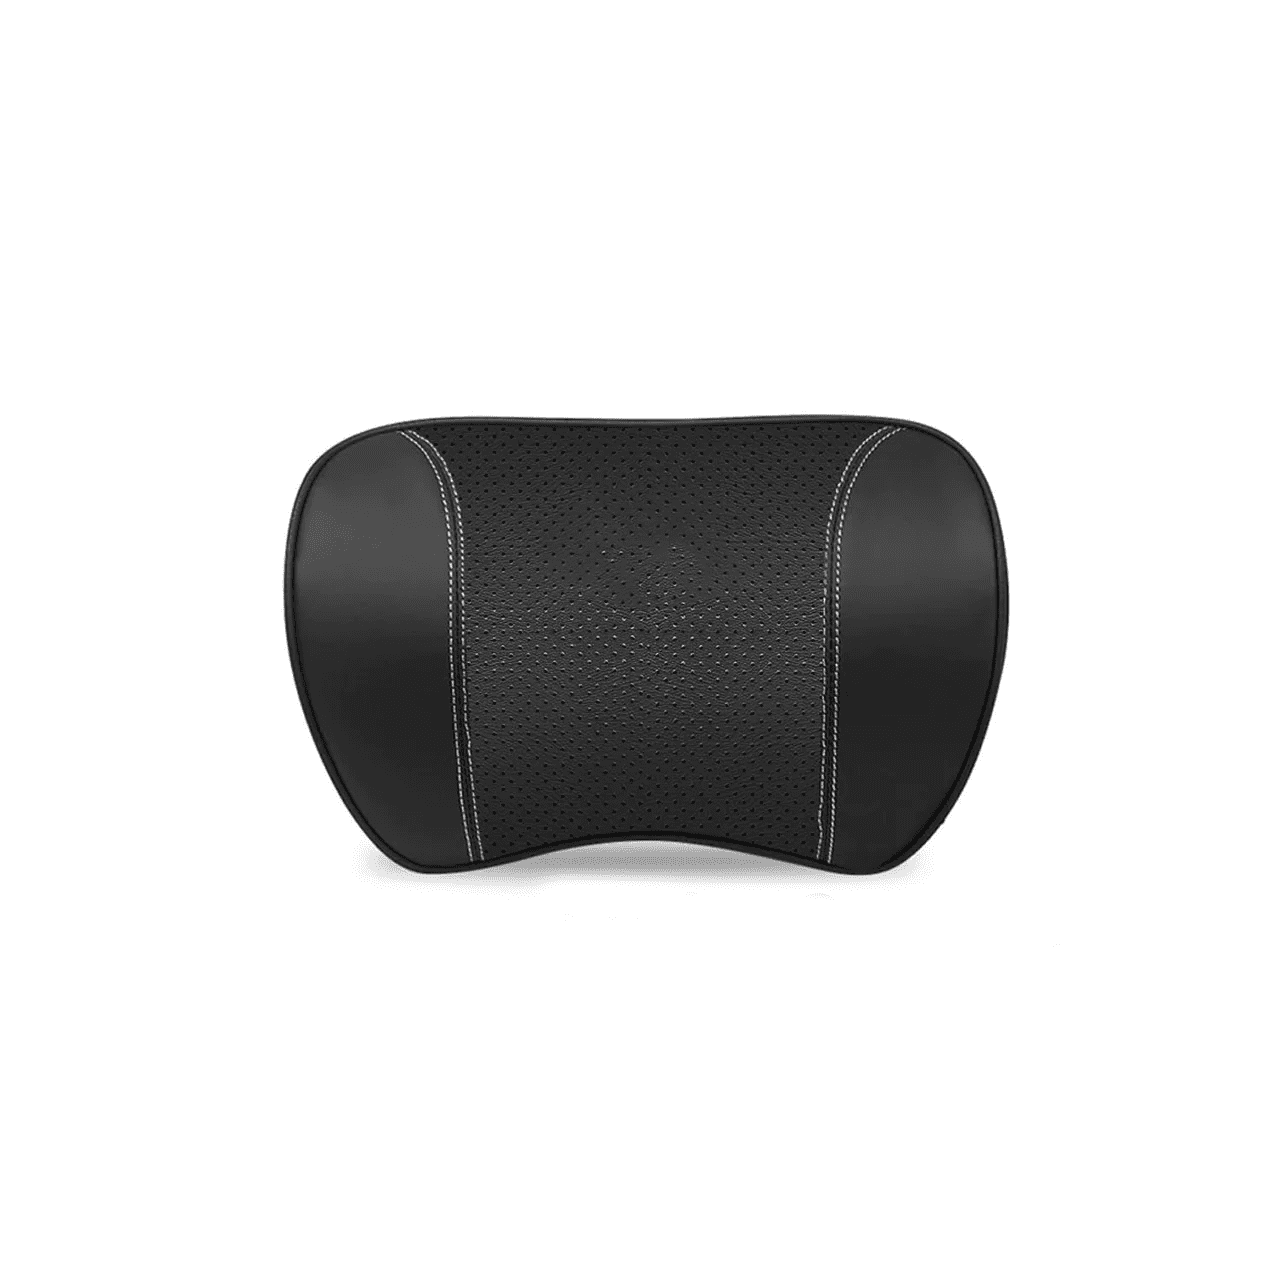 Car Headrest Neck Pillow and Lumbar Support Back Cushion Kit, Custom Fit For Your Cars, Memory Foam Erognomic, Car Accessories UE13992